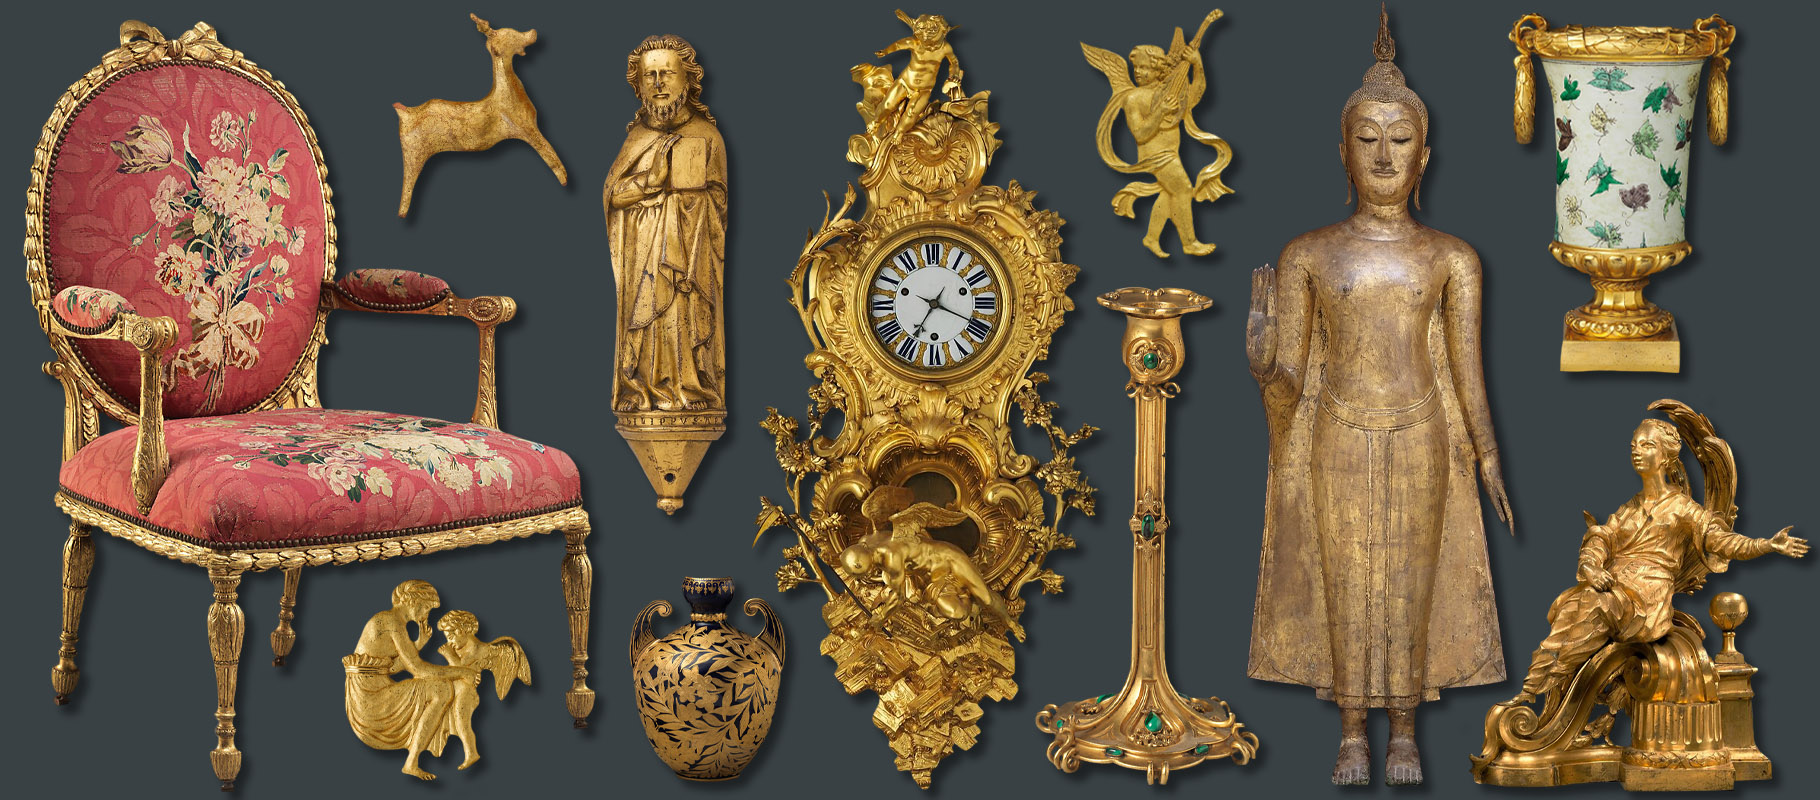 Gilt objects